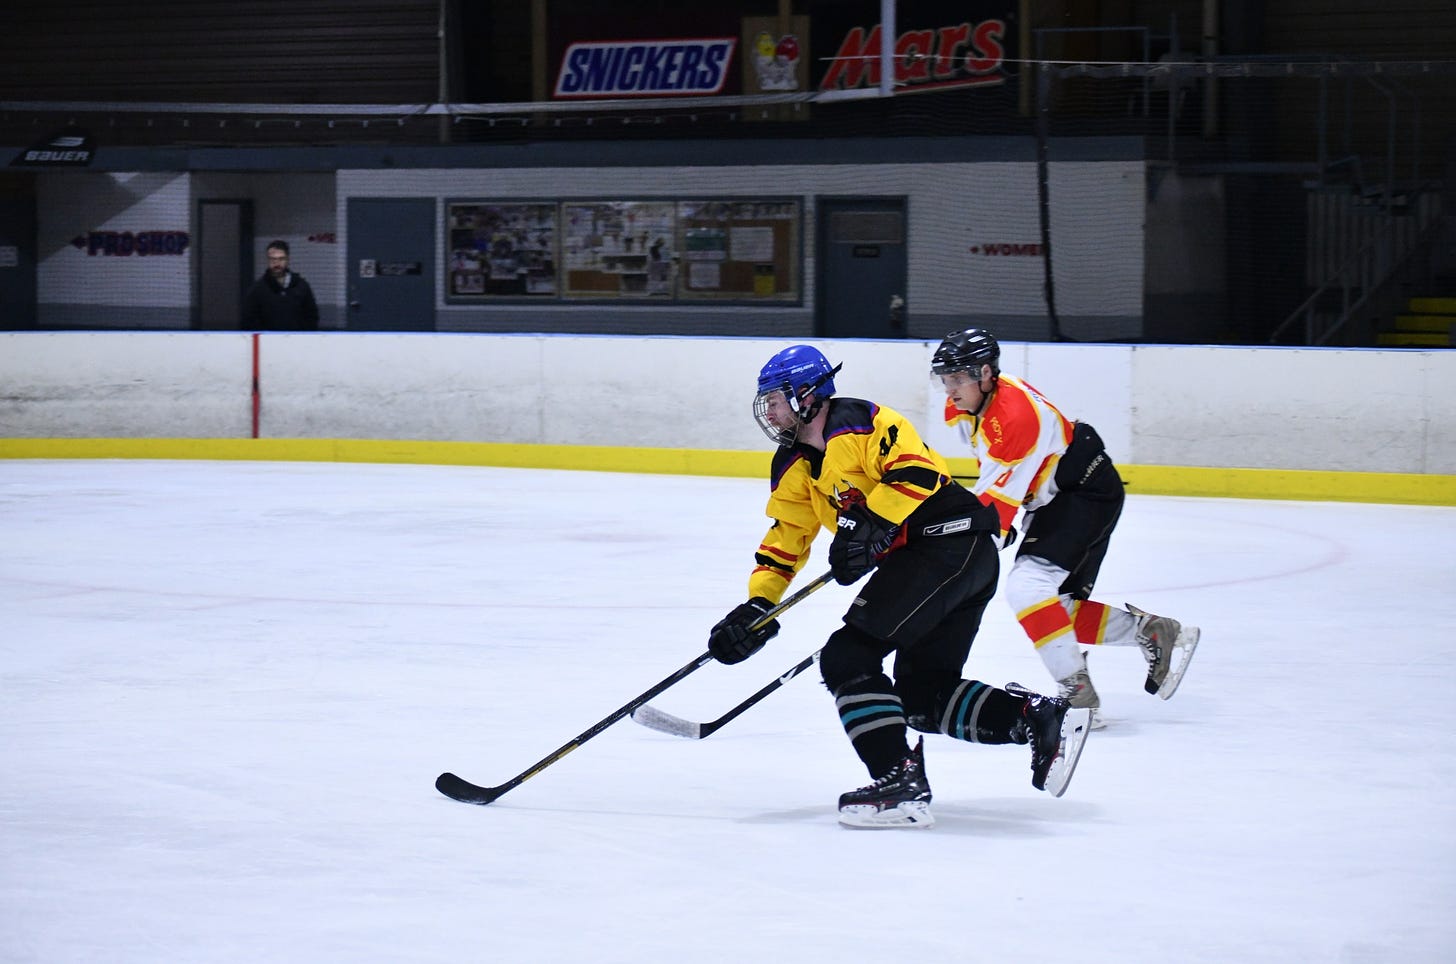 May be an image of 2 people, people playing hockey, people standing and indoor